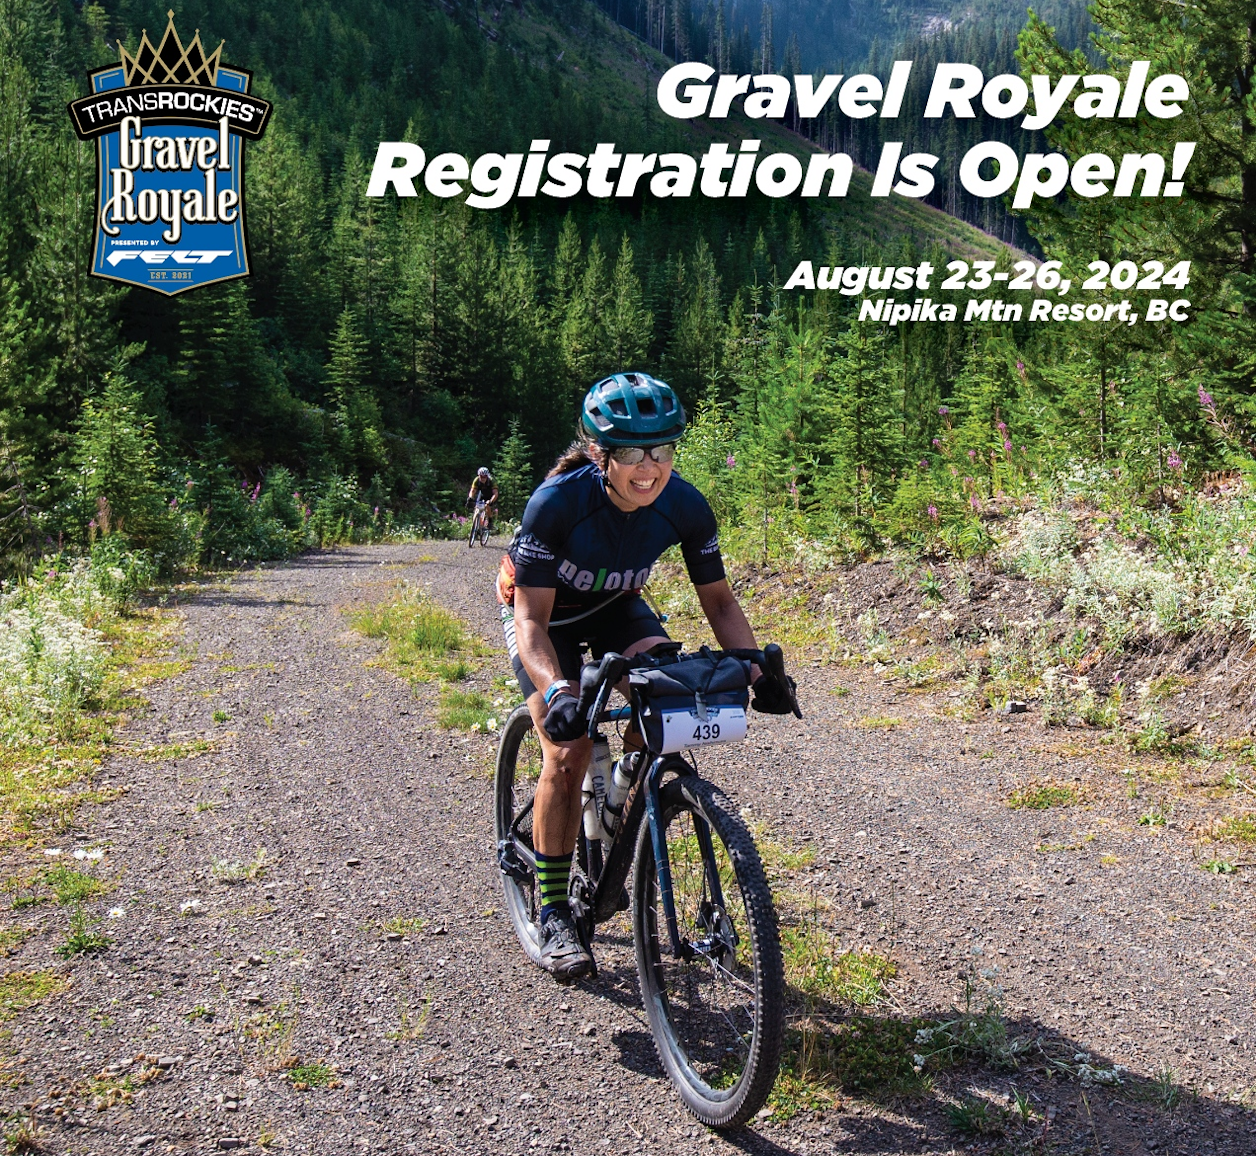 Go “All In On Adventure” at TransRockies Gravel Royale